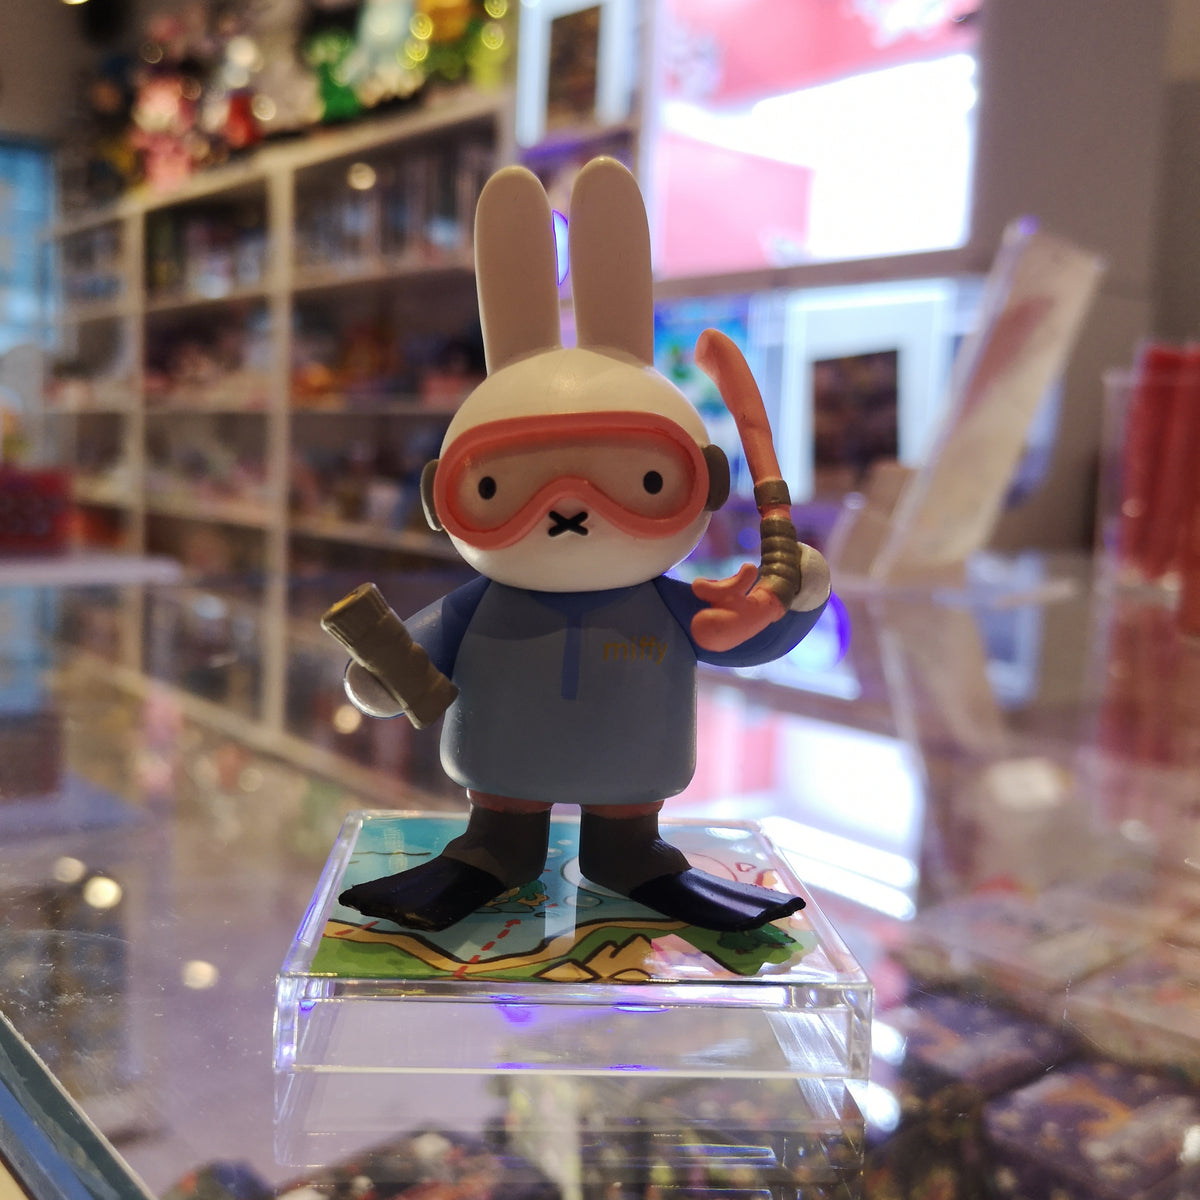 Scuba Diver - Miffy Adventure Blind Box Series by KINGBEE